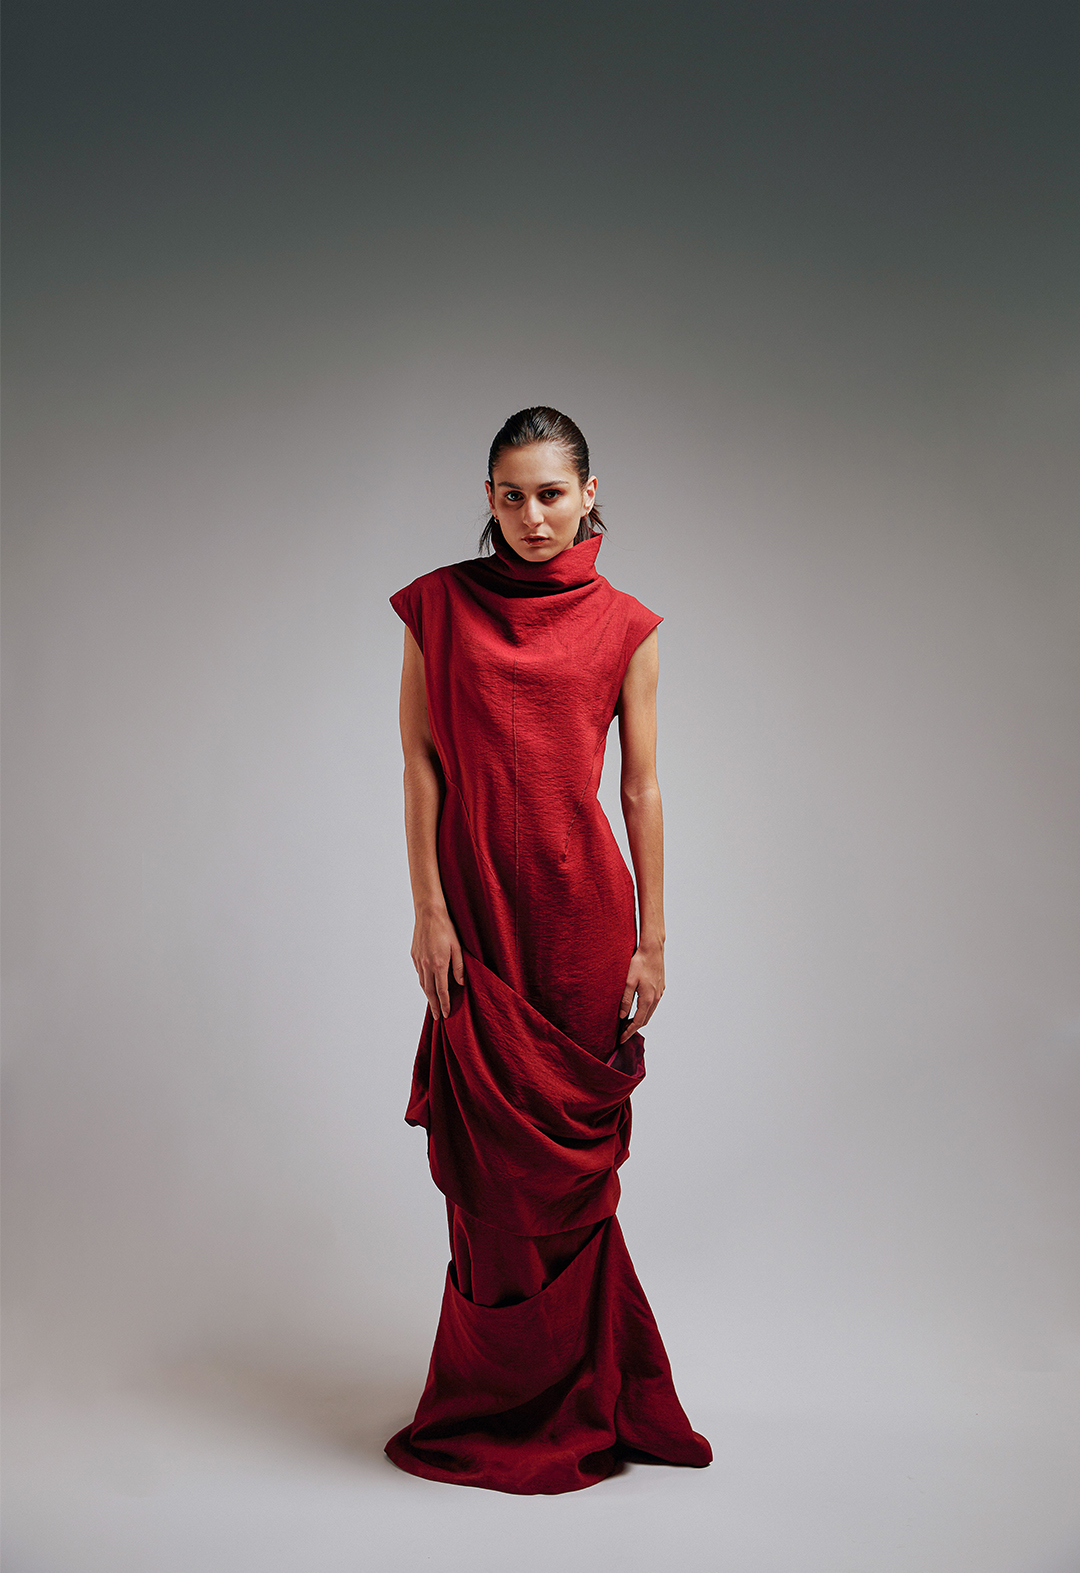 Look 1 is draped in textured burgundy crepe, showing beautiful drapes of the dress with custom stitching in the middle and sides. 